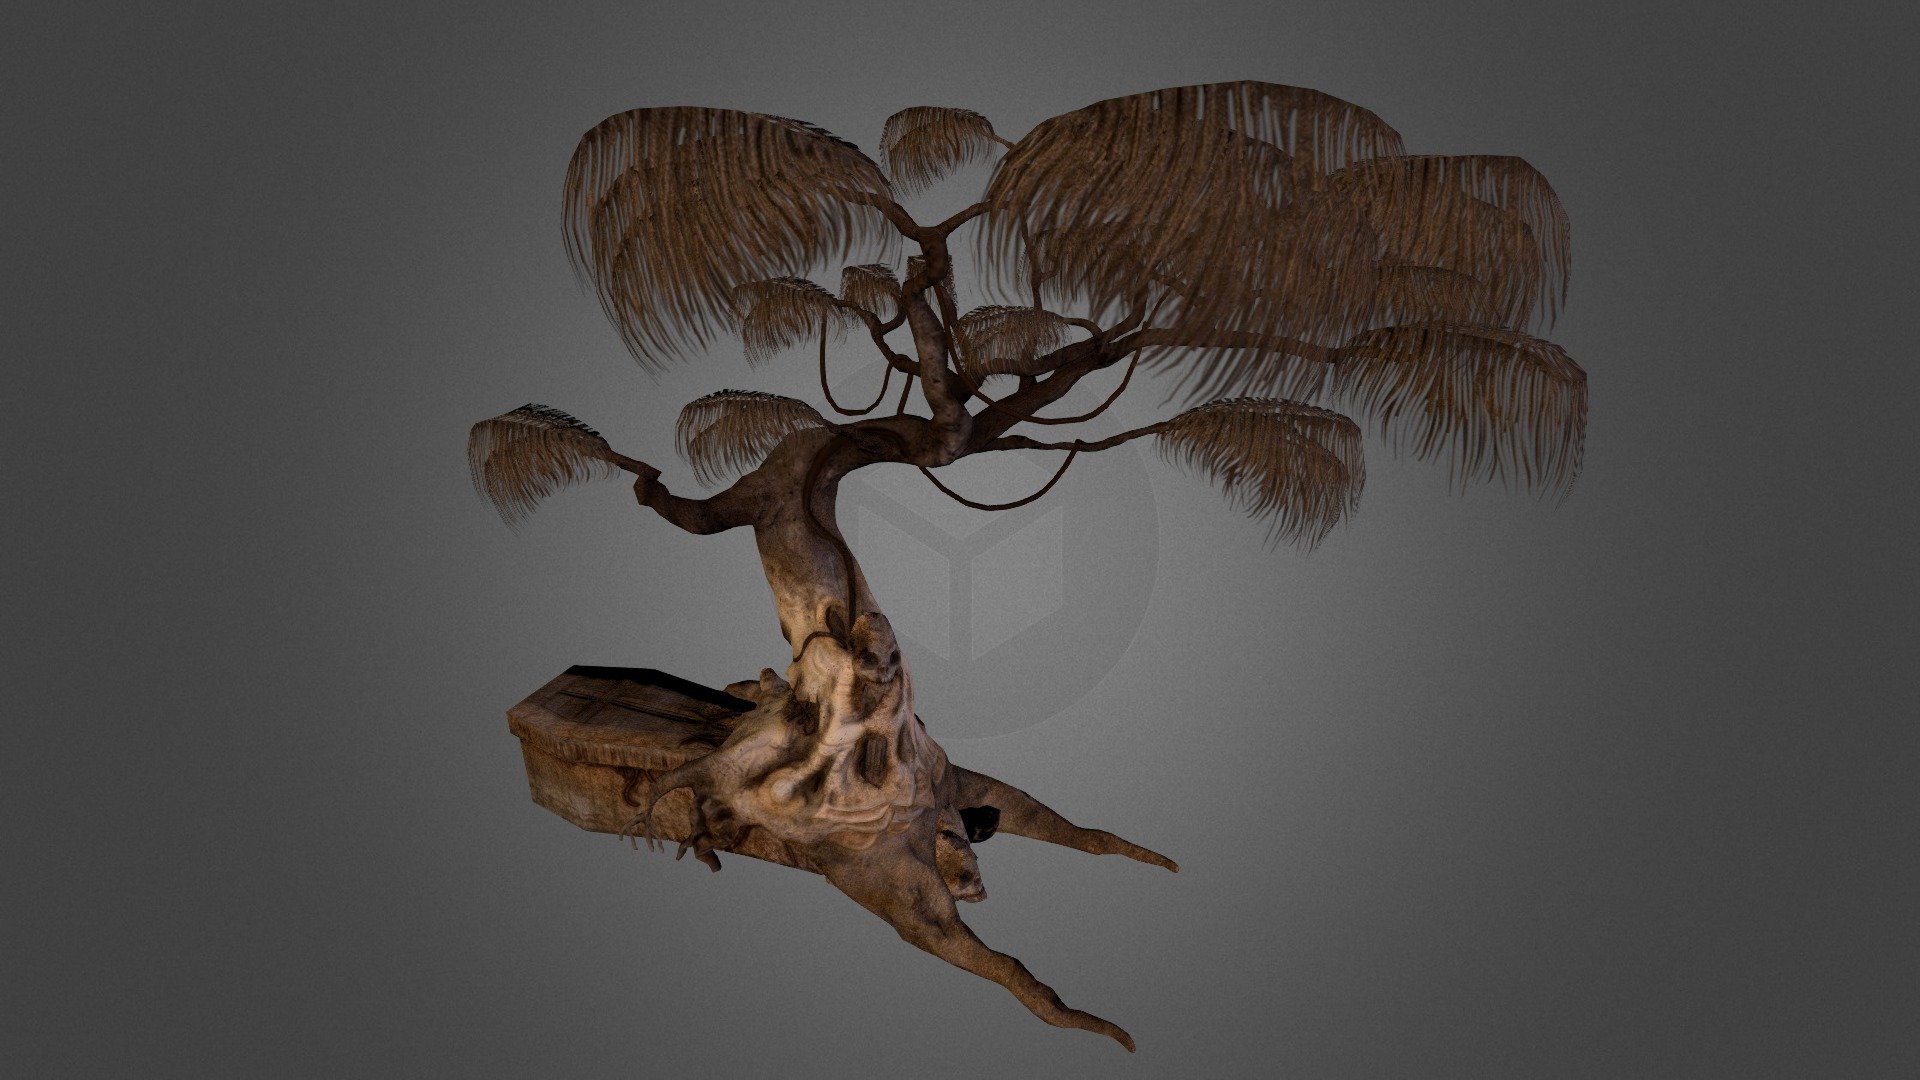 14,324 Tris.  2048x2048 Textures.  Made in 3 Weeks.  Textures made using images from CGTextures. Inspired by Firefall Thumper Tree Concept by Jay Axer 3d model